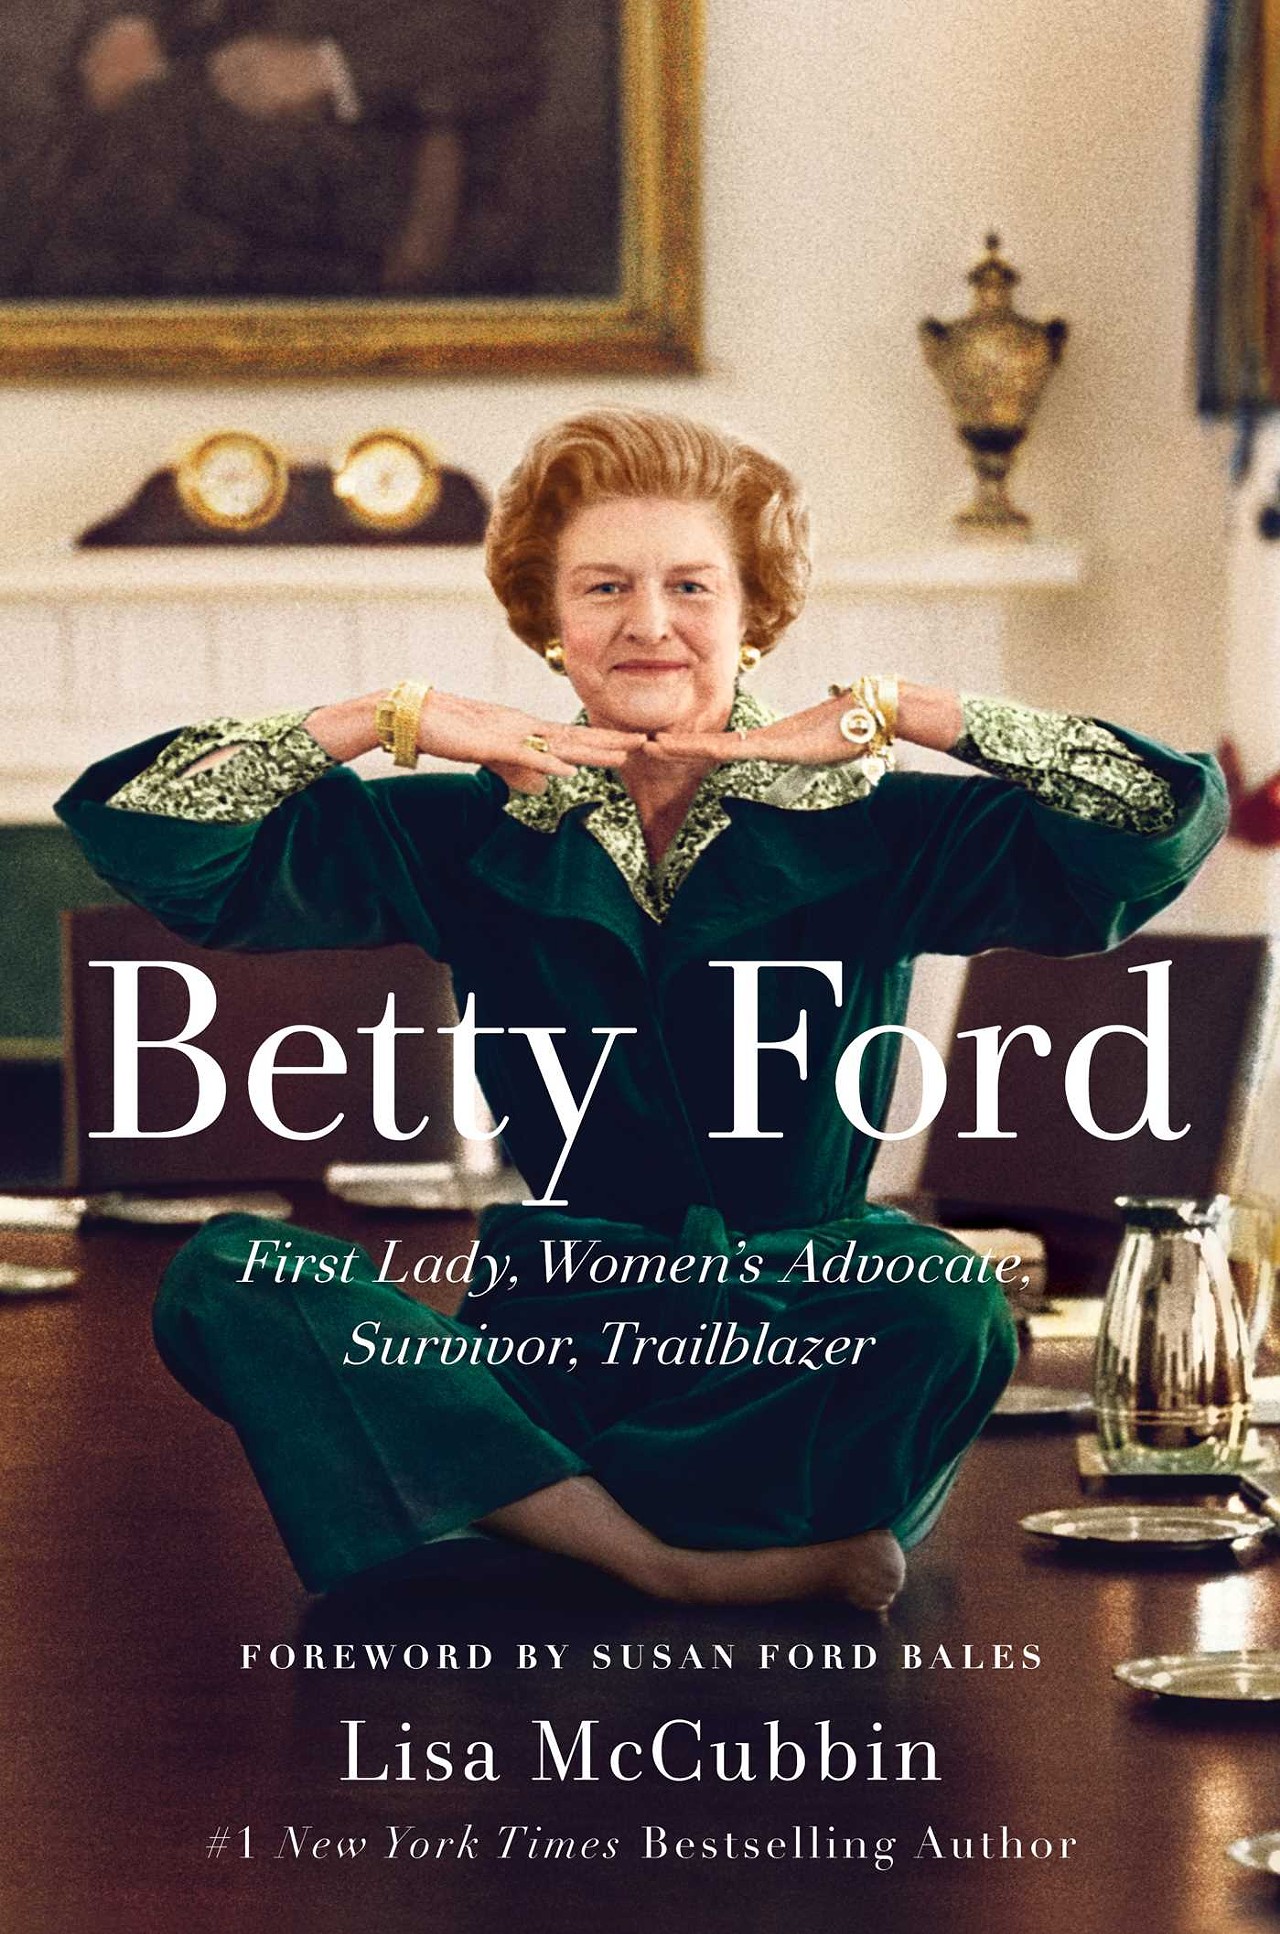 Betty Ford: First Lady, Women&#146;s Advocate, Survivor, Trailblazer
From Lisa McCubbin, the No. 1 New York Times bestselling author of Five Presidents and The Kennedy Detail, comes the story of Betty Ford, the former first lady to Michigan native Gerald Ford. Journalist McCubbin details Betty&#146;s groundbreaking work to publicly champion causes related to equal rights, breast cancer, depression, abortion, and sexuality. The book is an intimate and revealing biography that charts one Midwestern girl&#146;s rise to the national stage &#151; and how she refused to be told how to act and what to do by men once there.